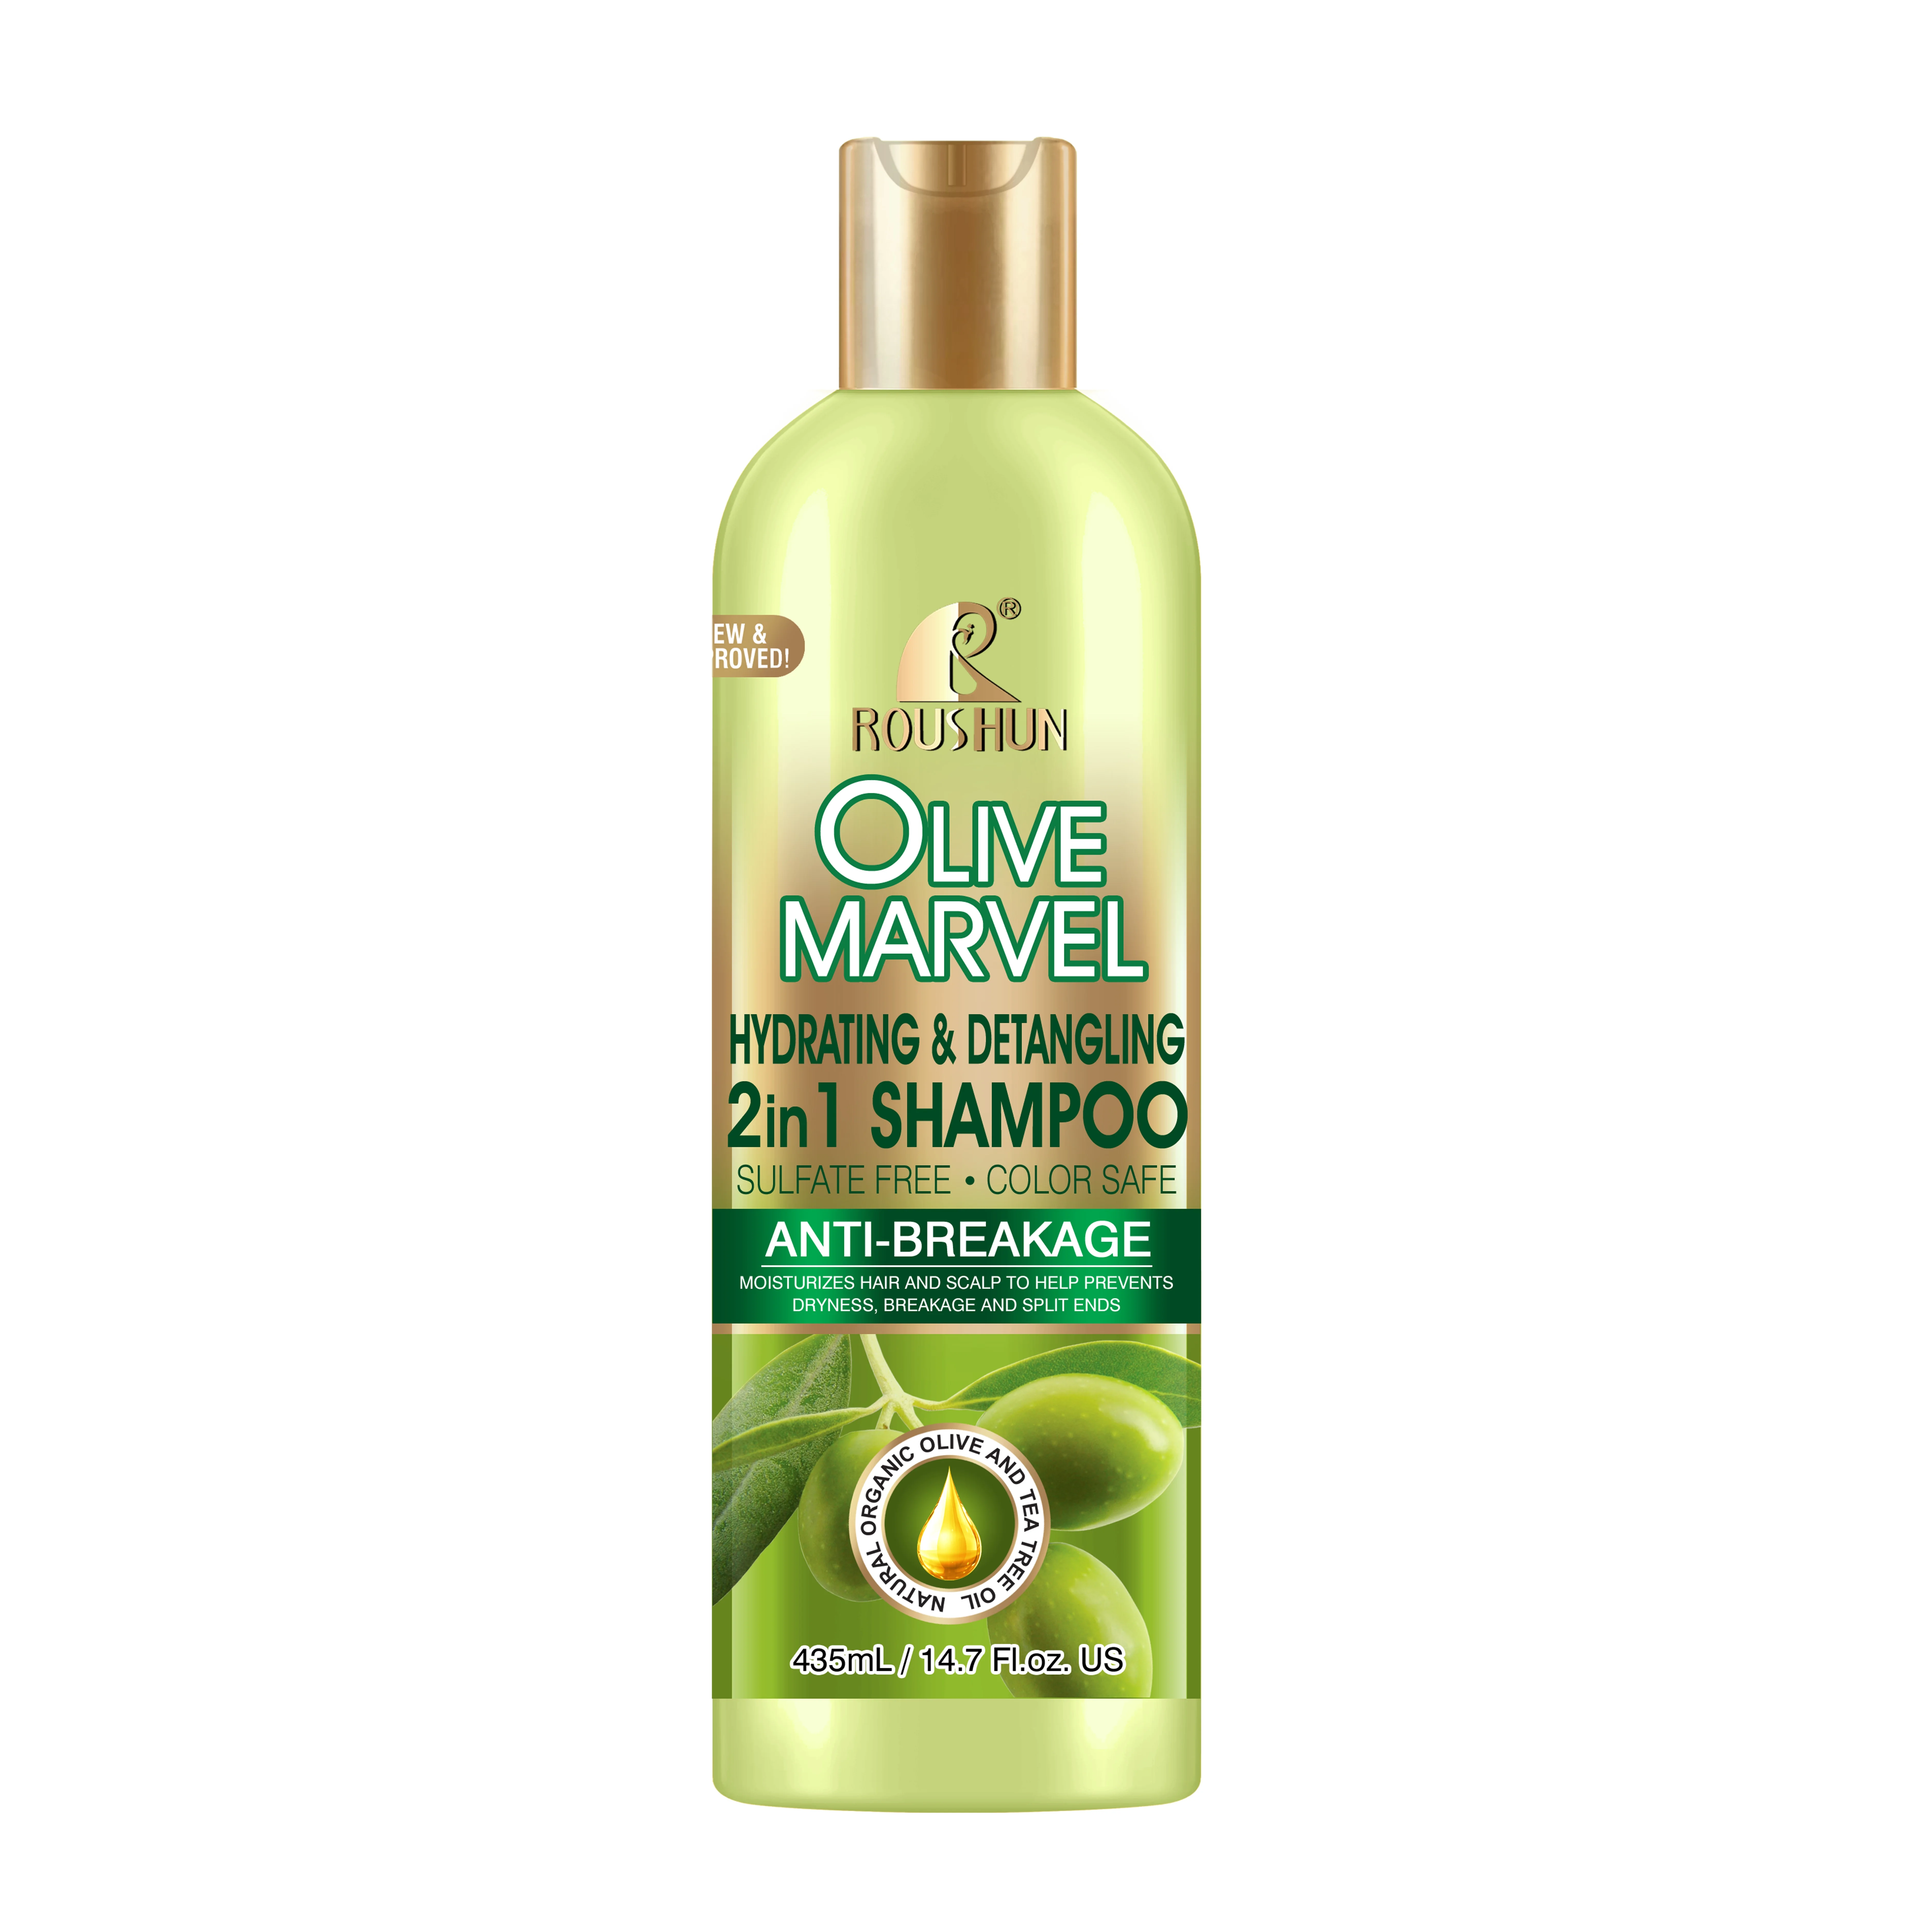 

Moisturizer Anti-Breakage Hair Shampoo 2 in 1 formula with Olive Oil 435ml by Roushun